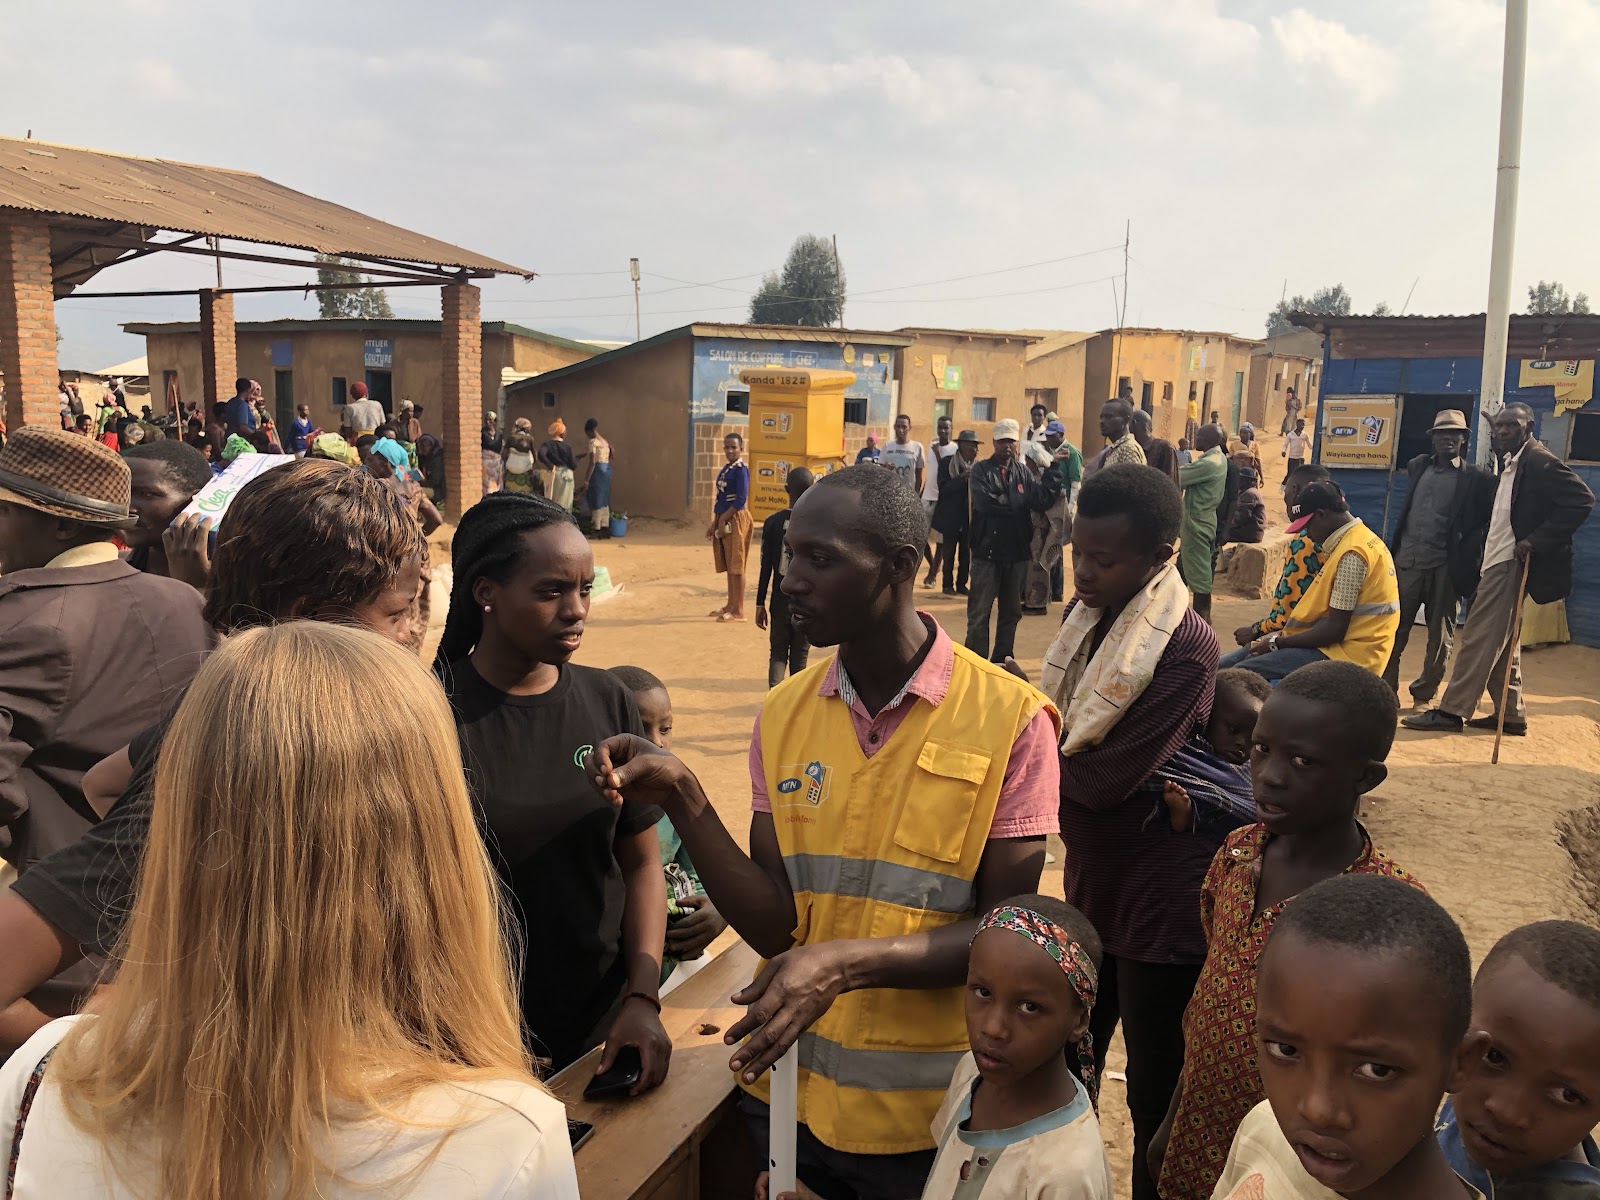 The Leaf team working in a refugee camp with high mobile money penetration. Each yellow sign and person in a yellow vest represents a “cash in” point to the Leaf system through existing telco agents.